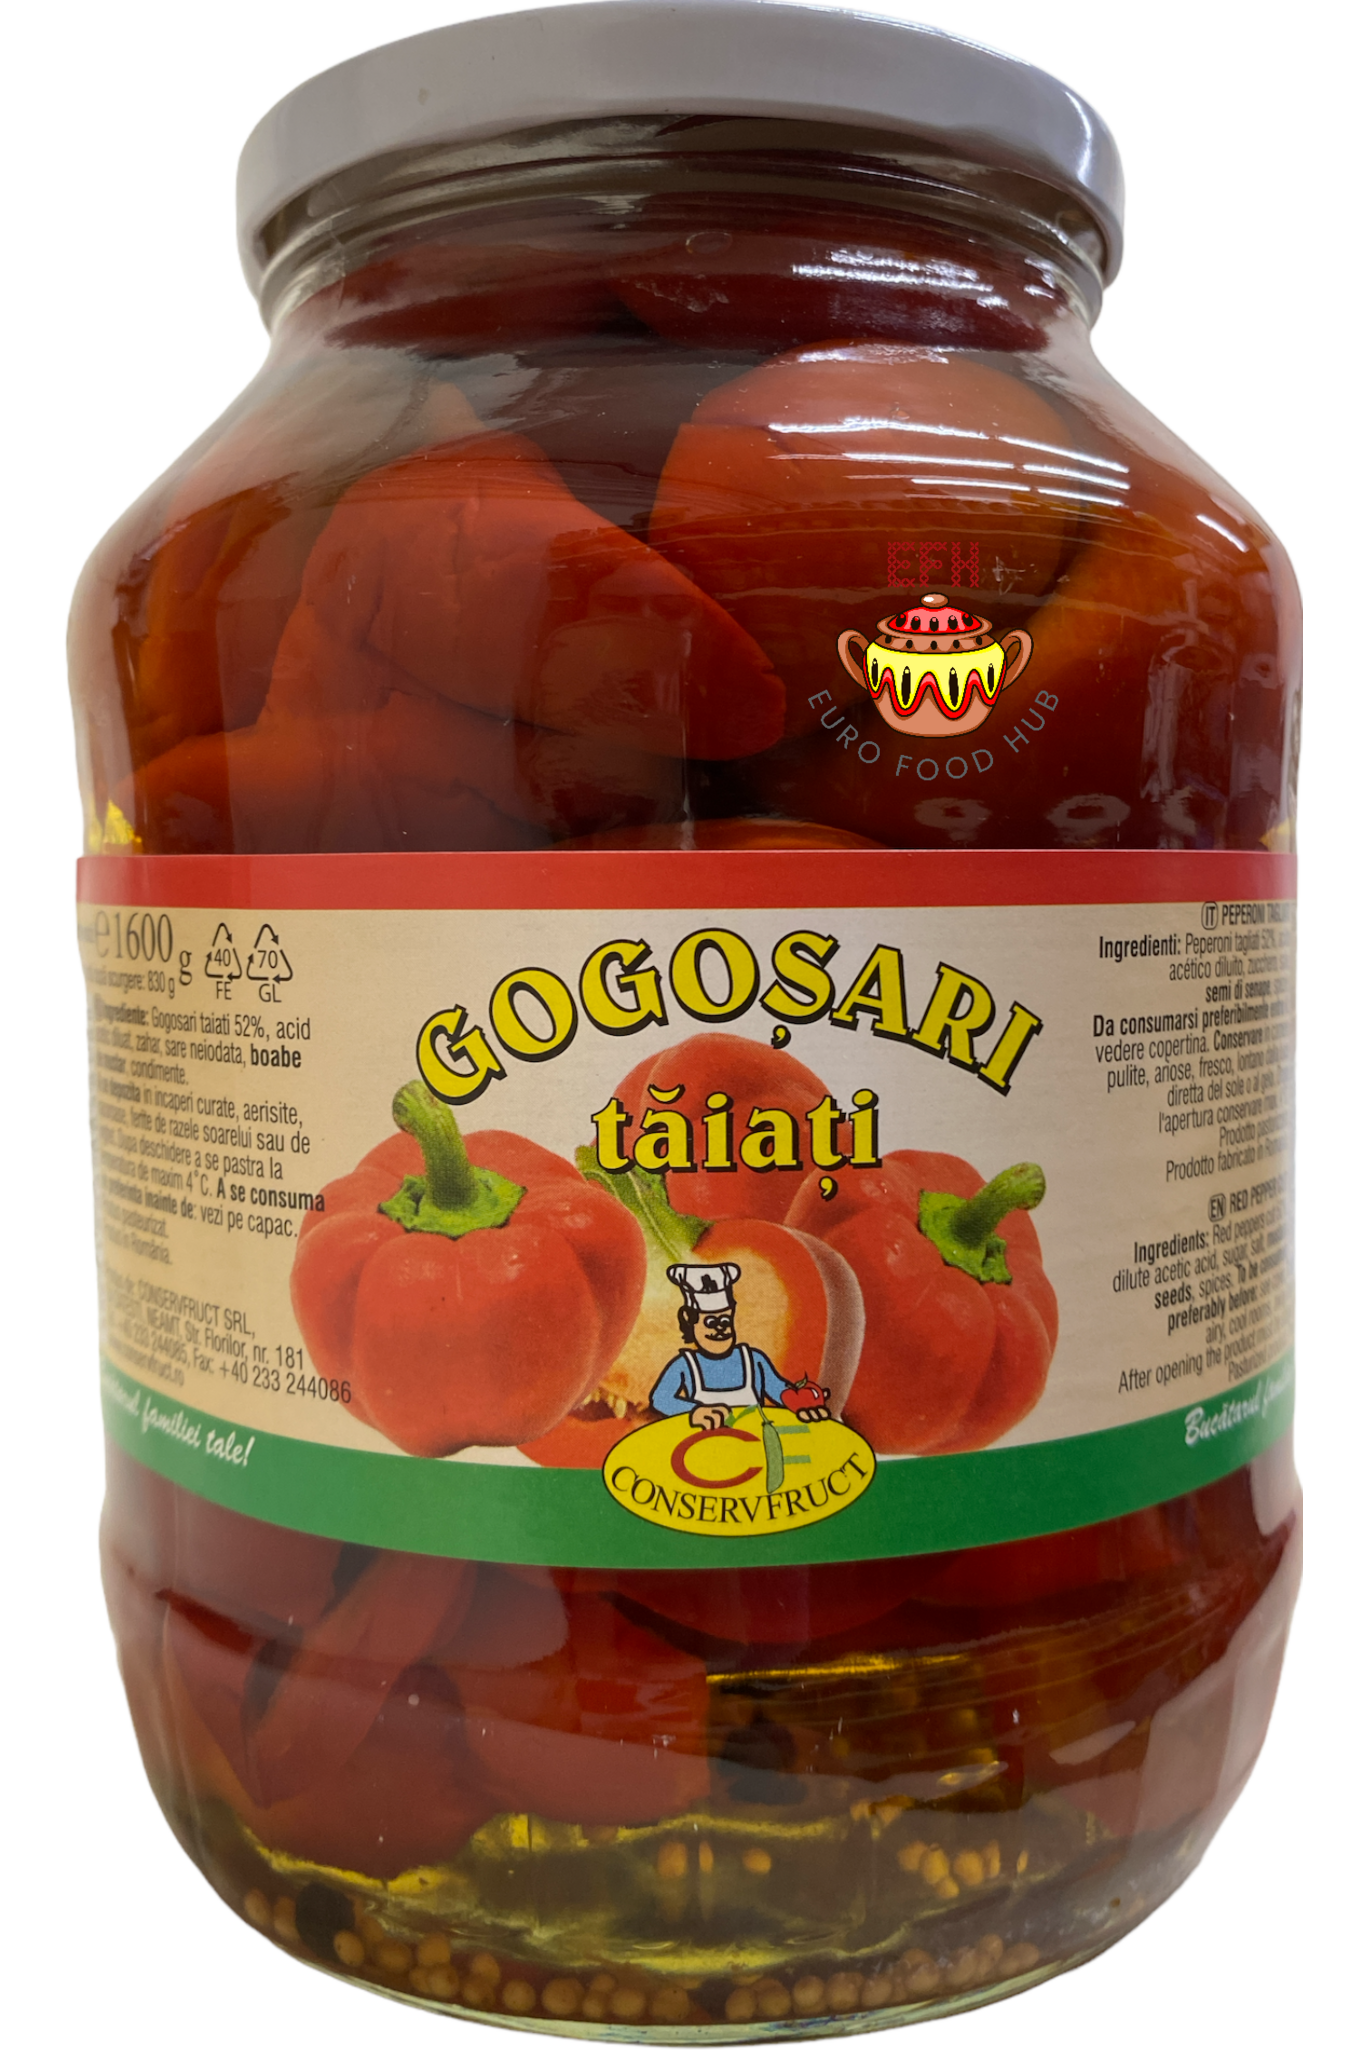 Pickled Chopped Bell Peppers - Conservfruct - GOGOSARI TAIATI 1.6 kg